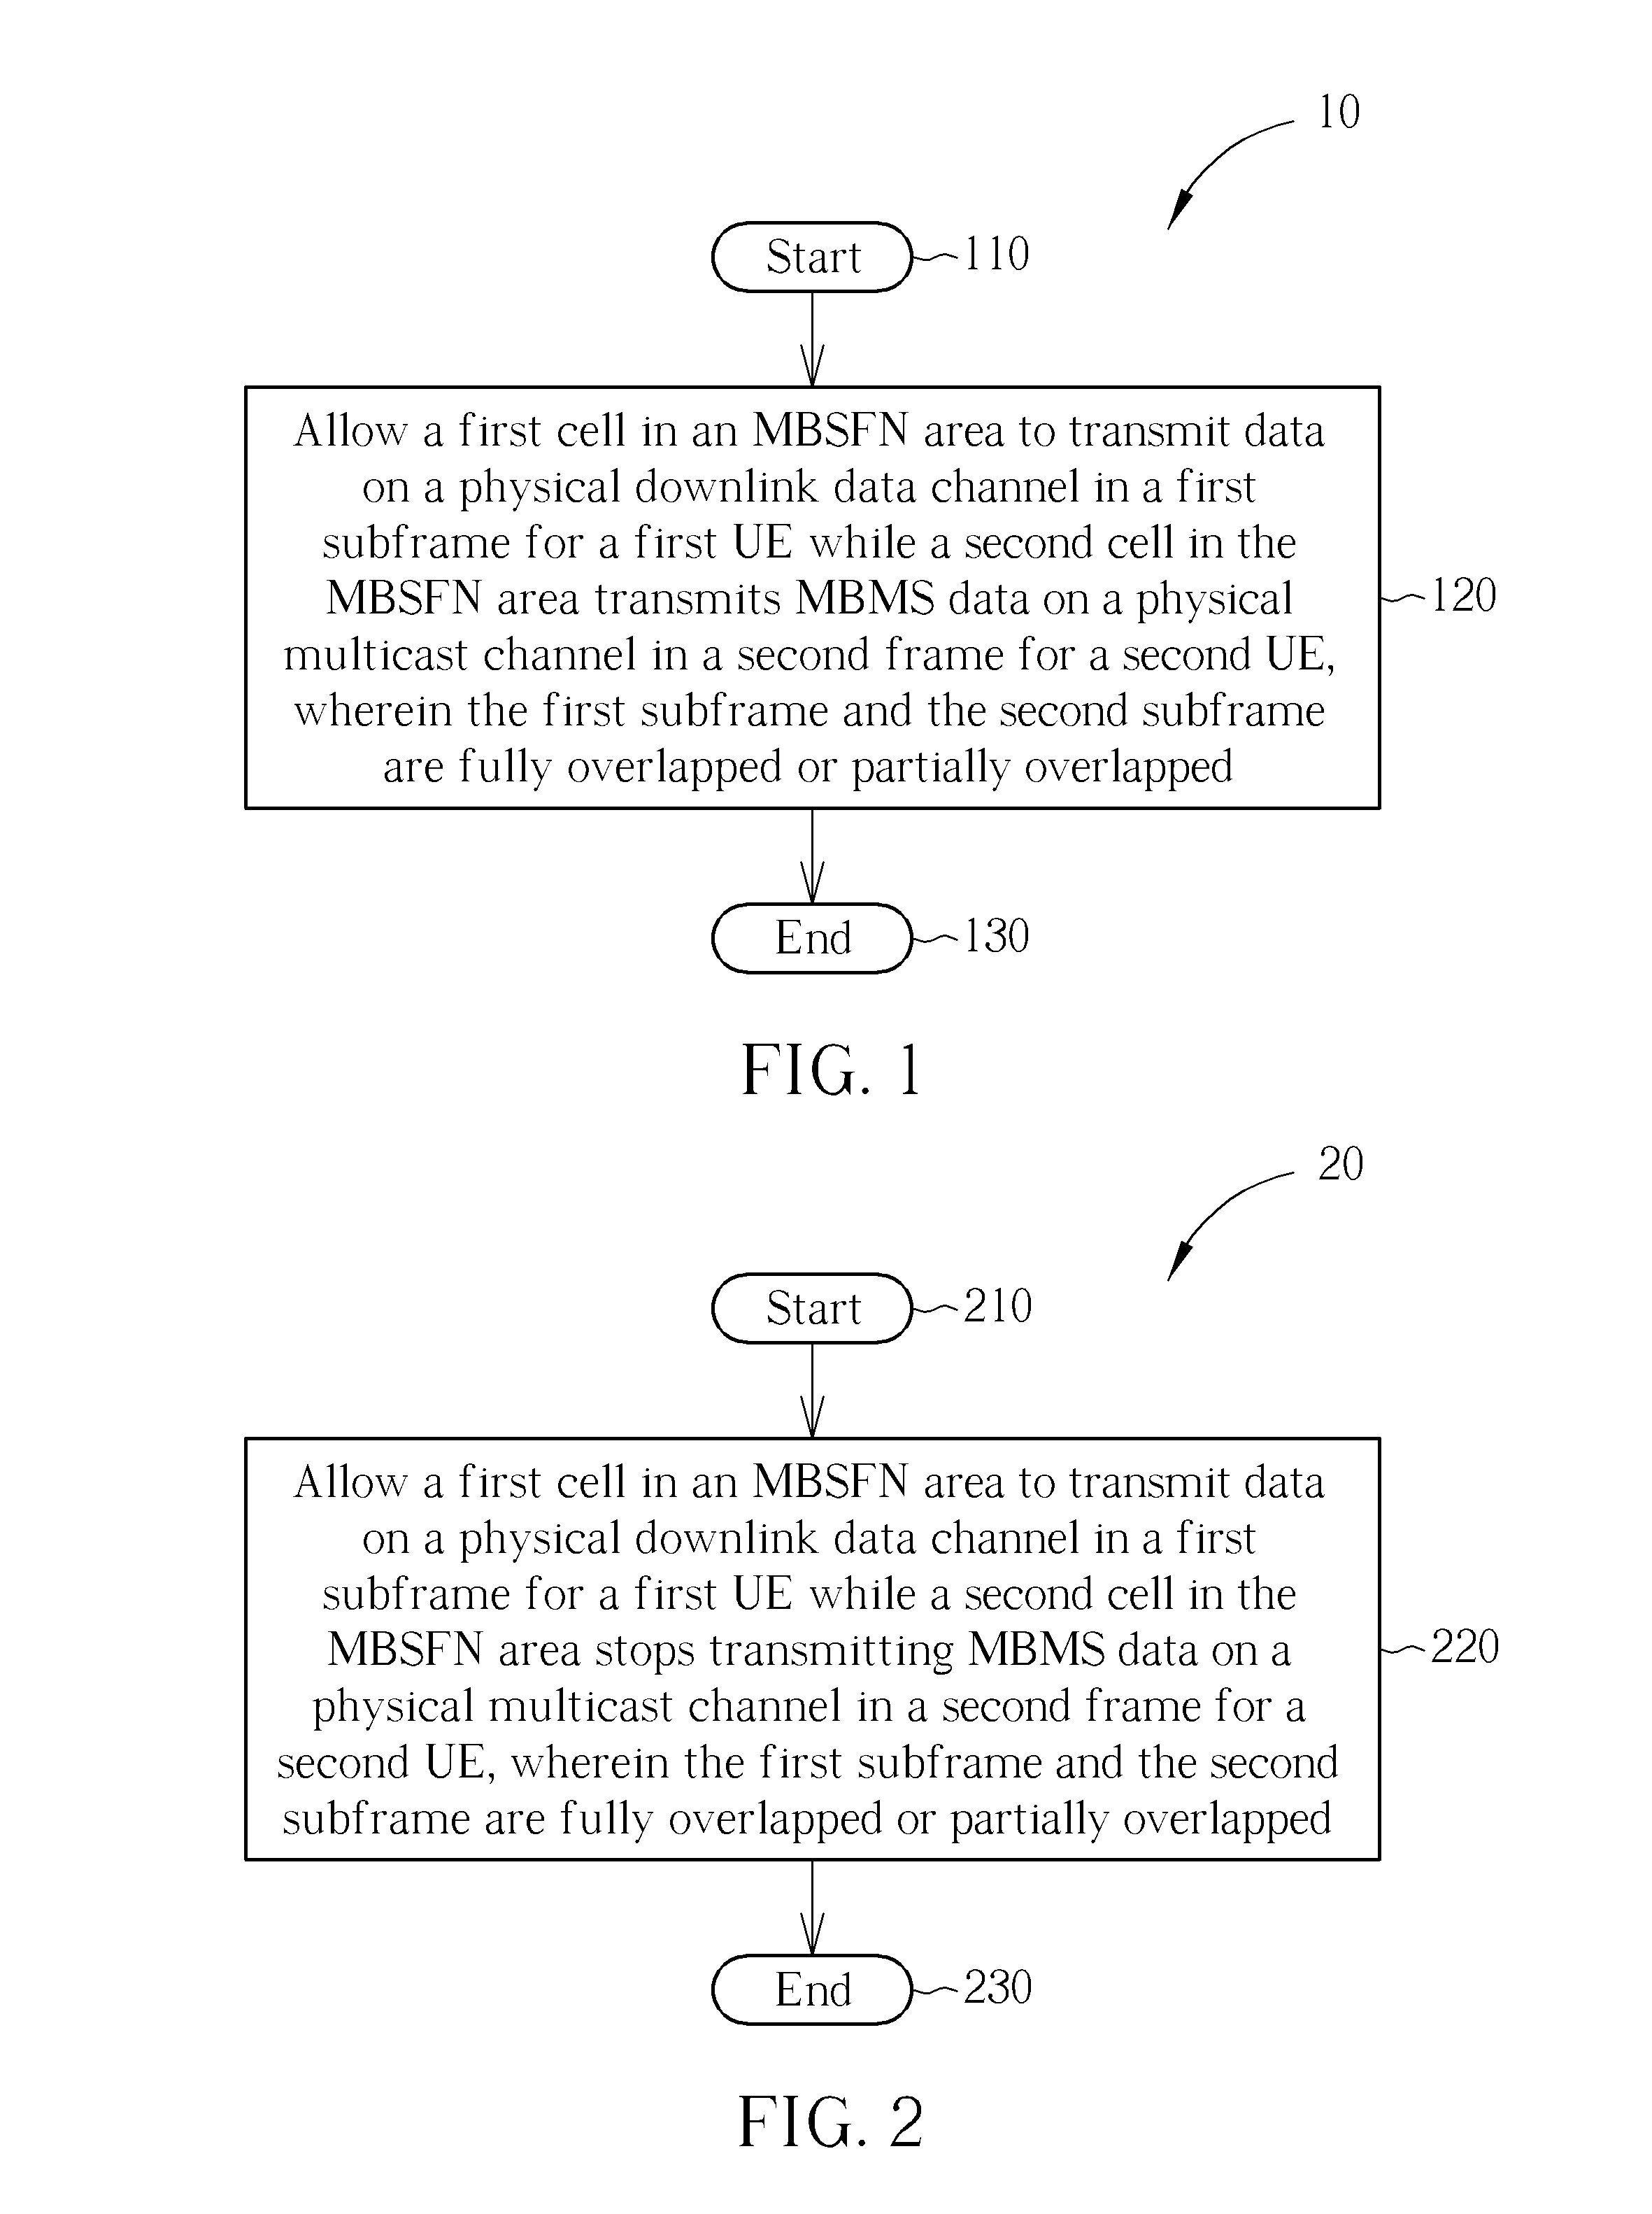 Method for realizing MBMS under bandwidth aggregation, CoMP and relay operation